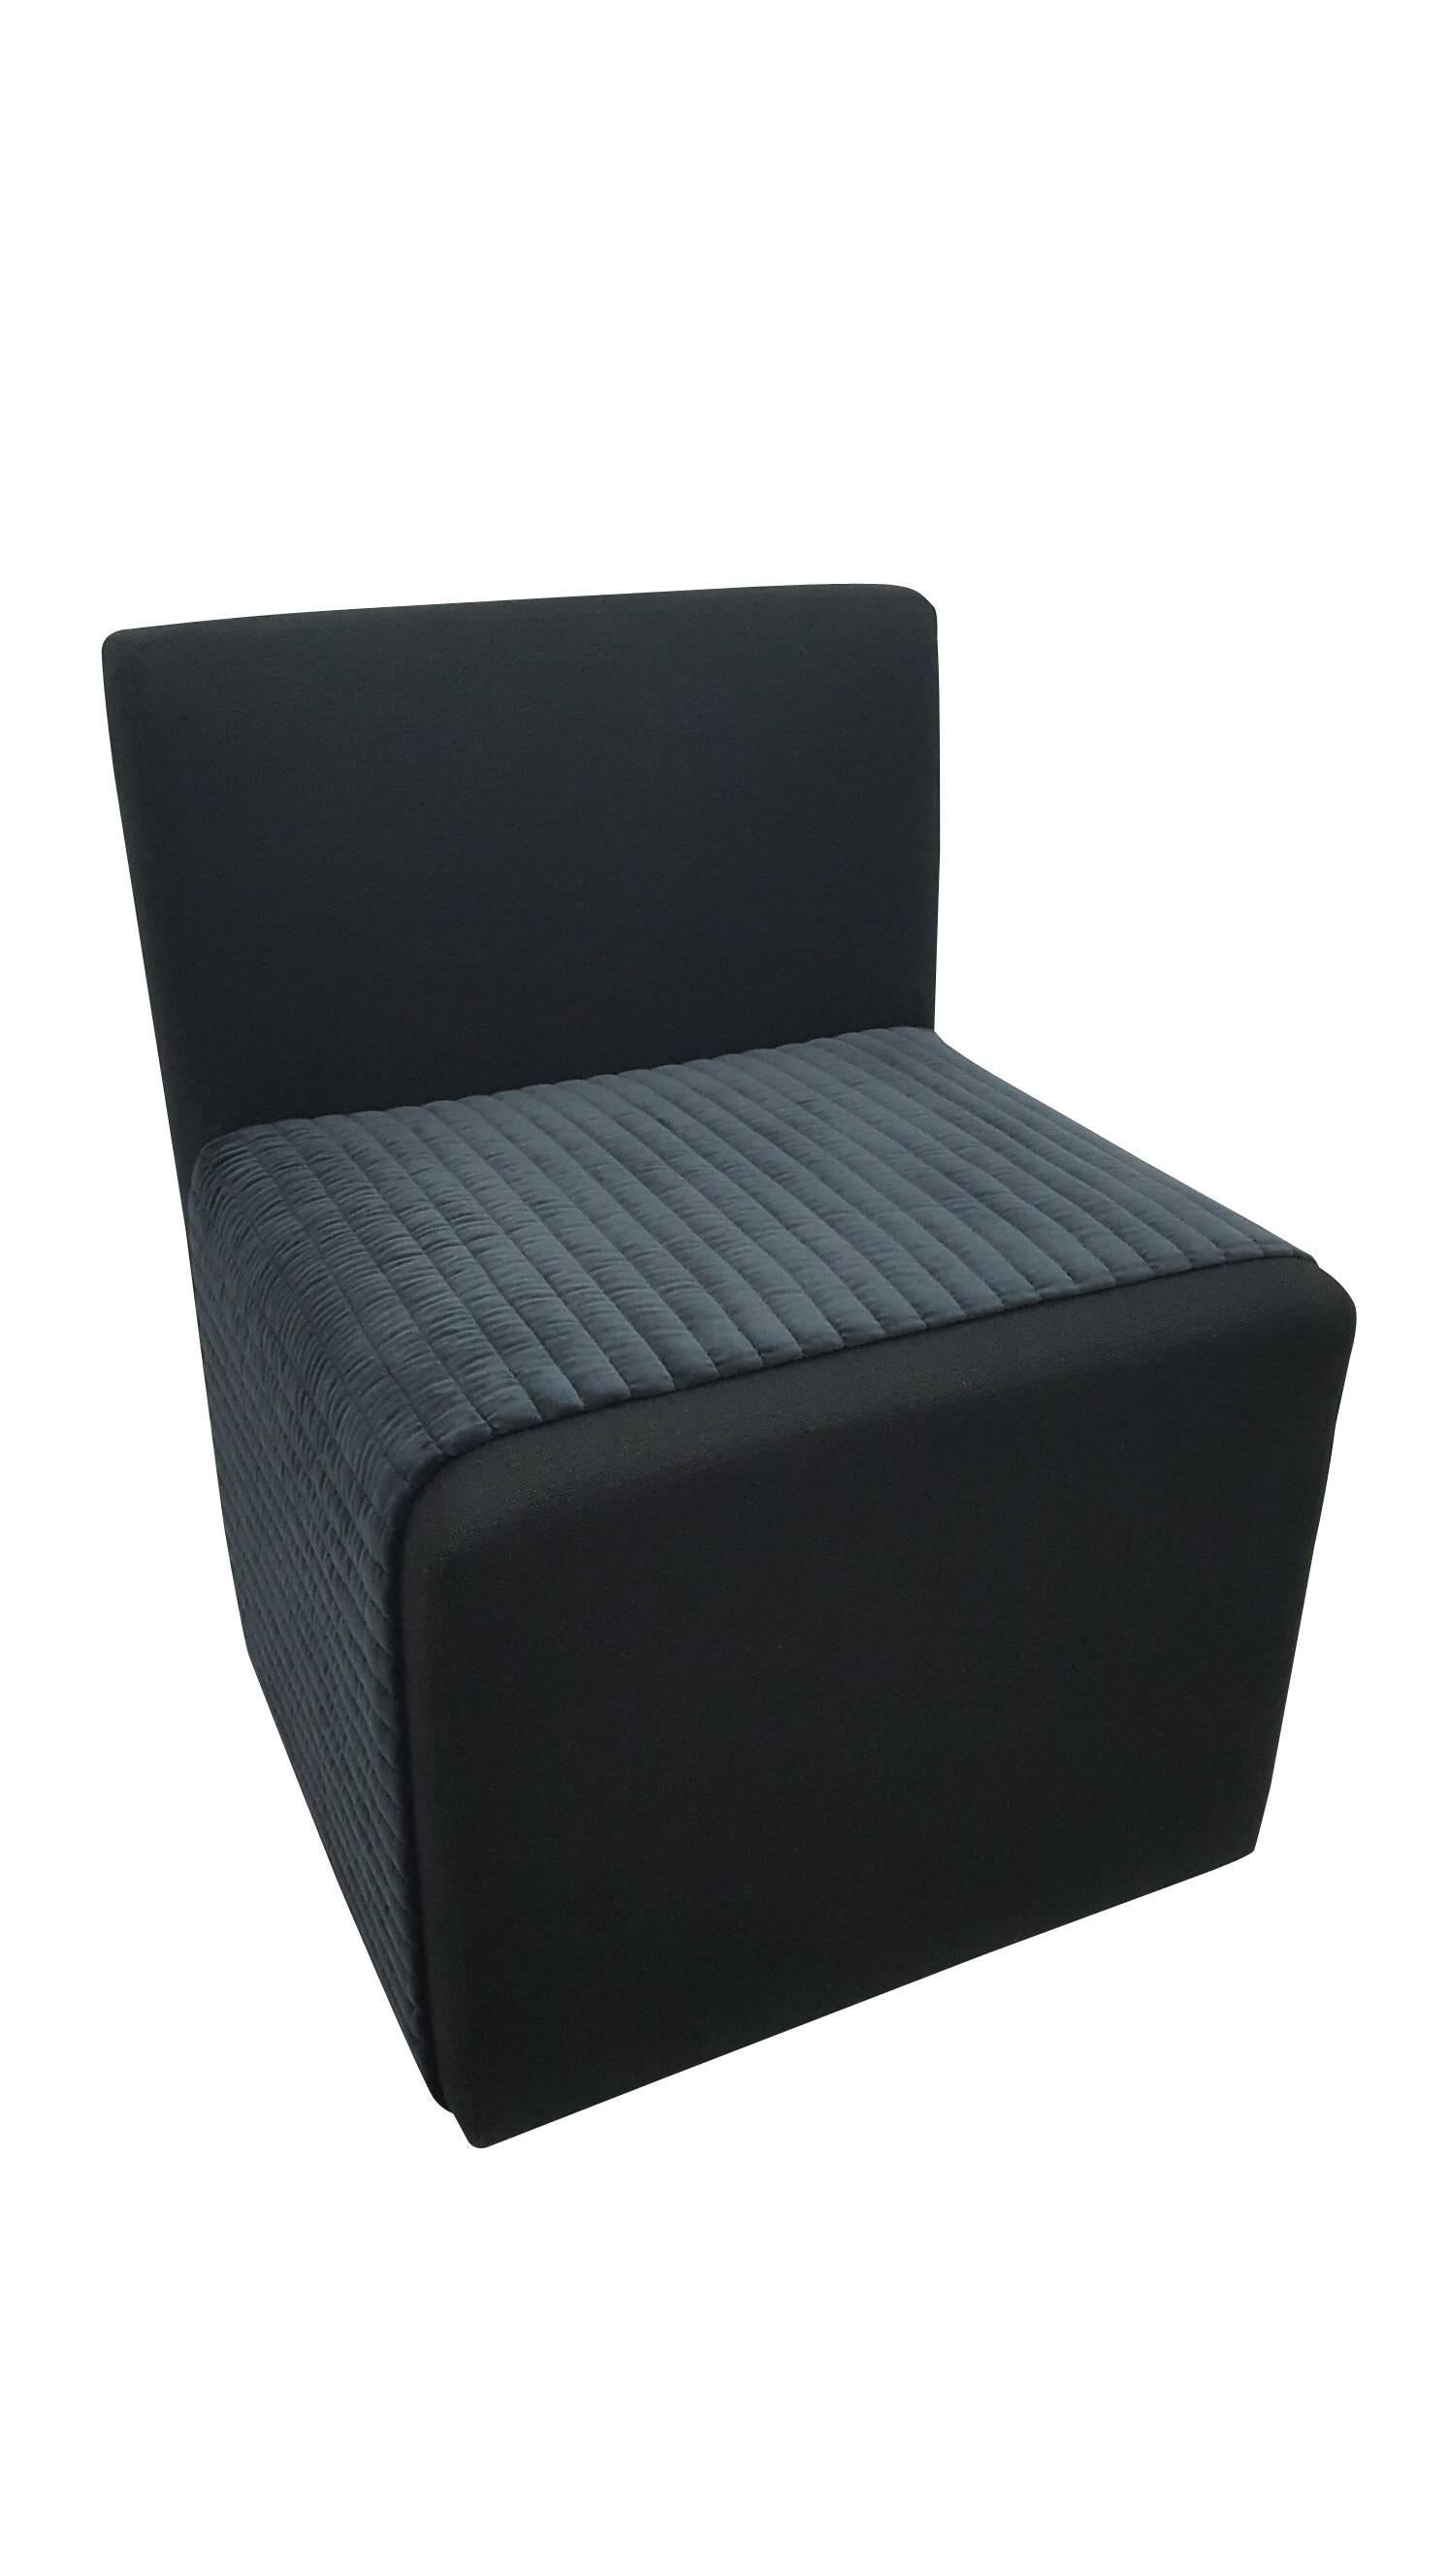 Beautiful Mirtha Chair designed by Michael Dawkins.
100% made in the USA.
Contrasting fabrics.
Available also in C.O.M.